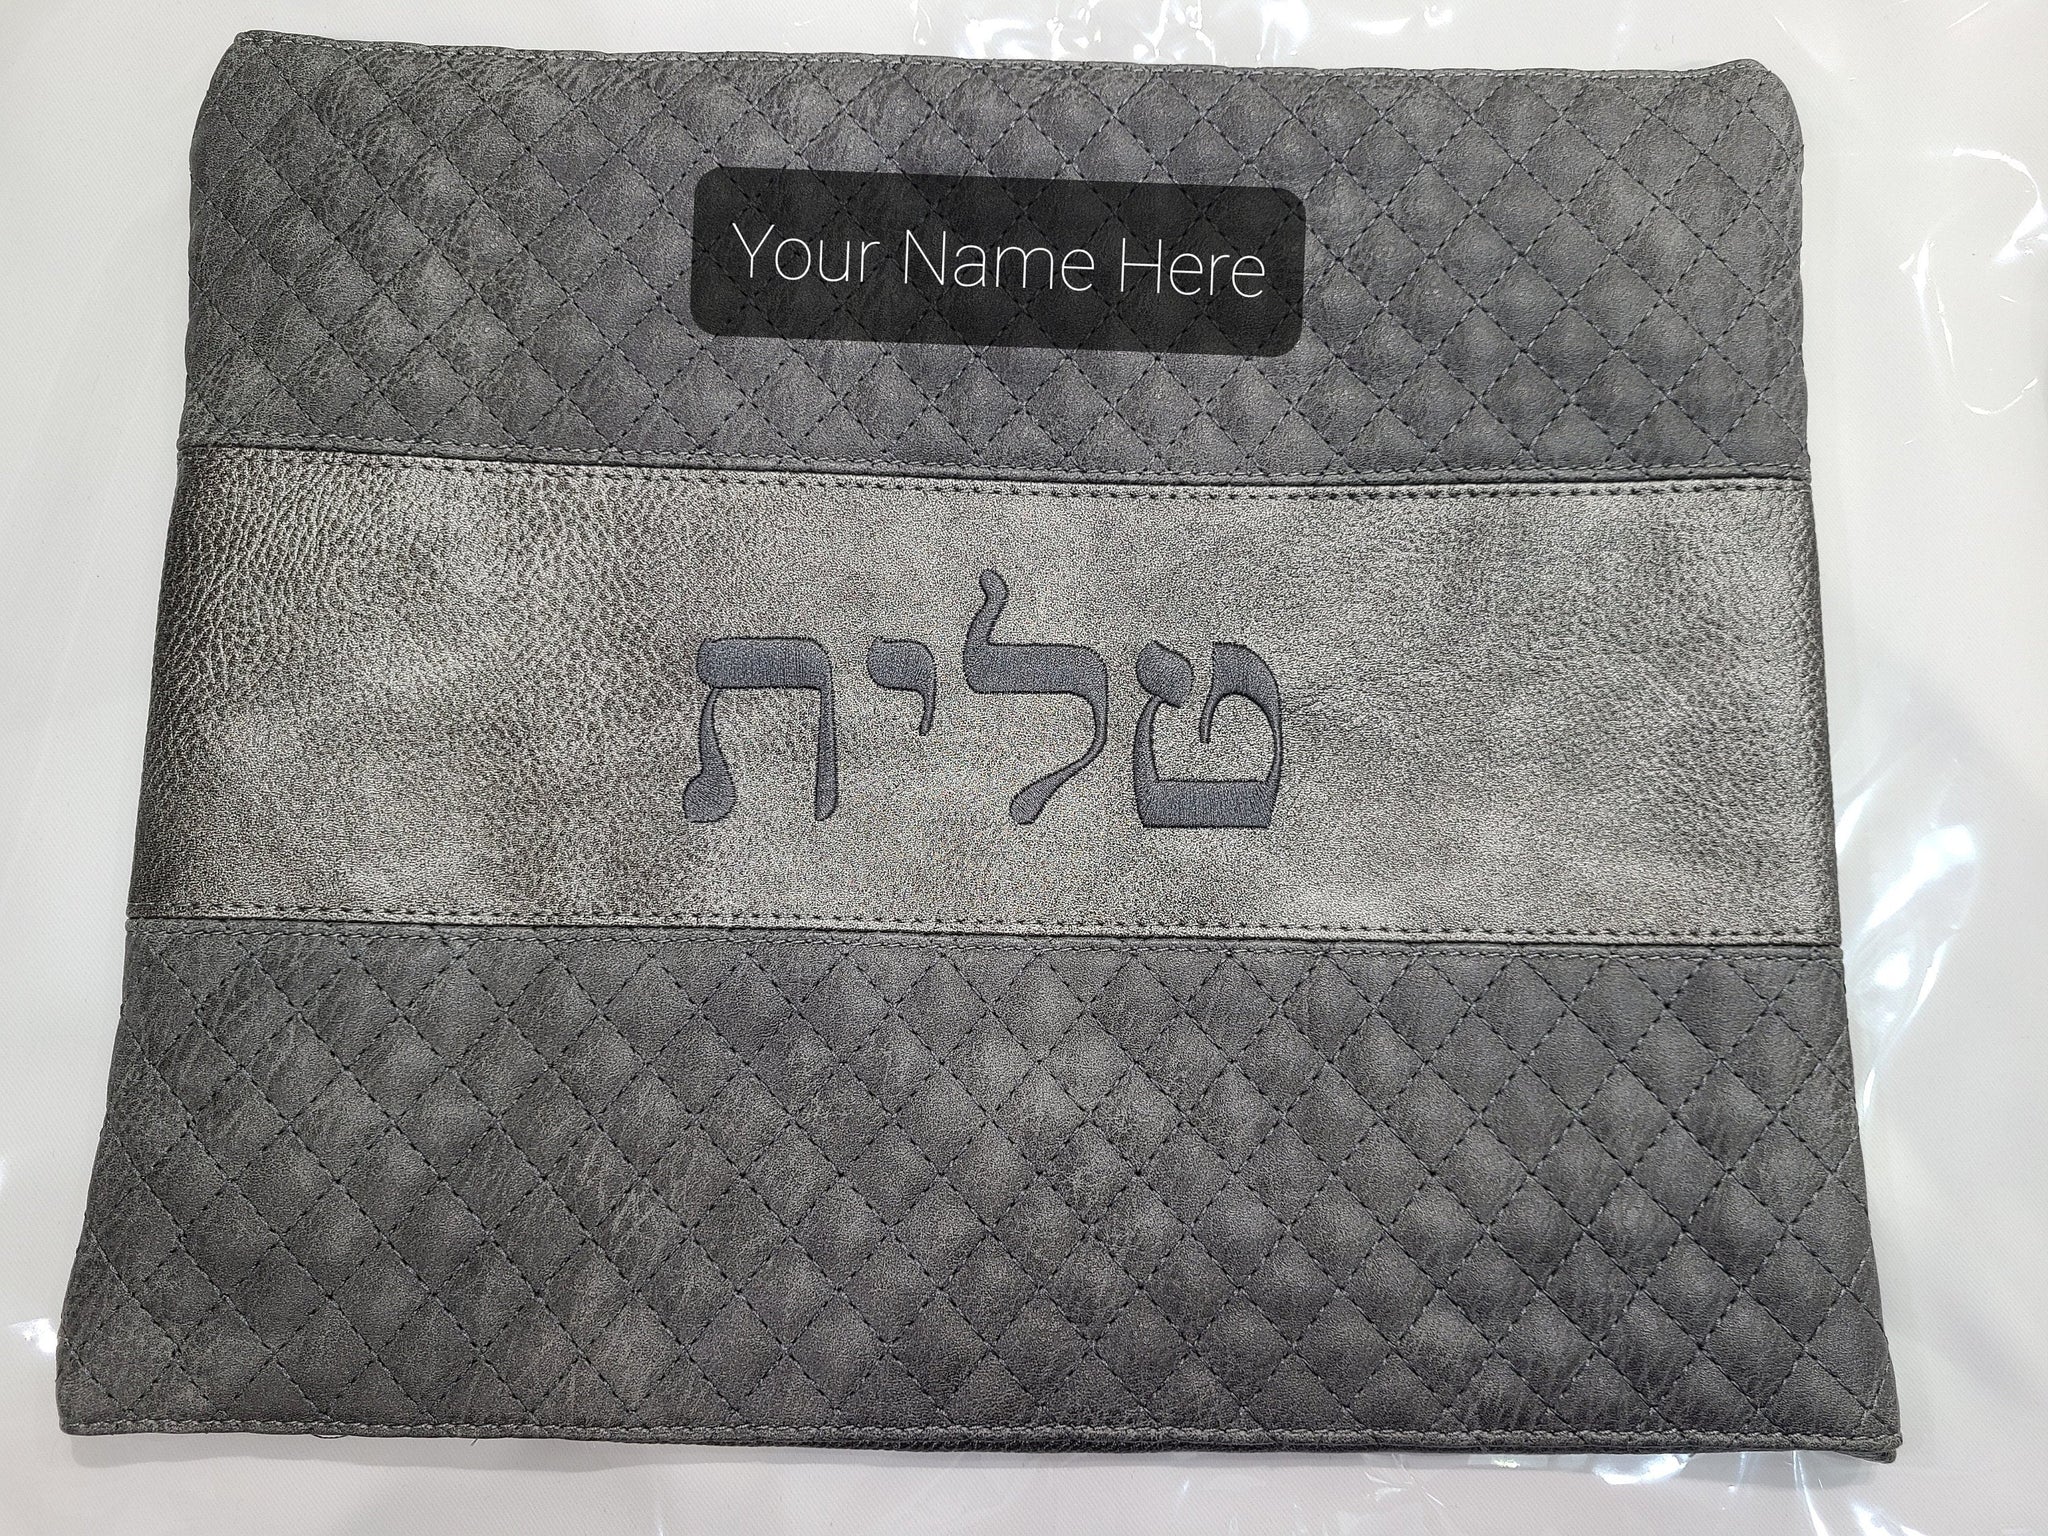 Brand New Diamond Design Tallit bag with Custom Embroidery included